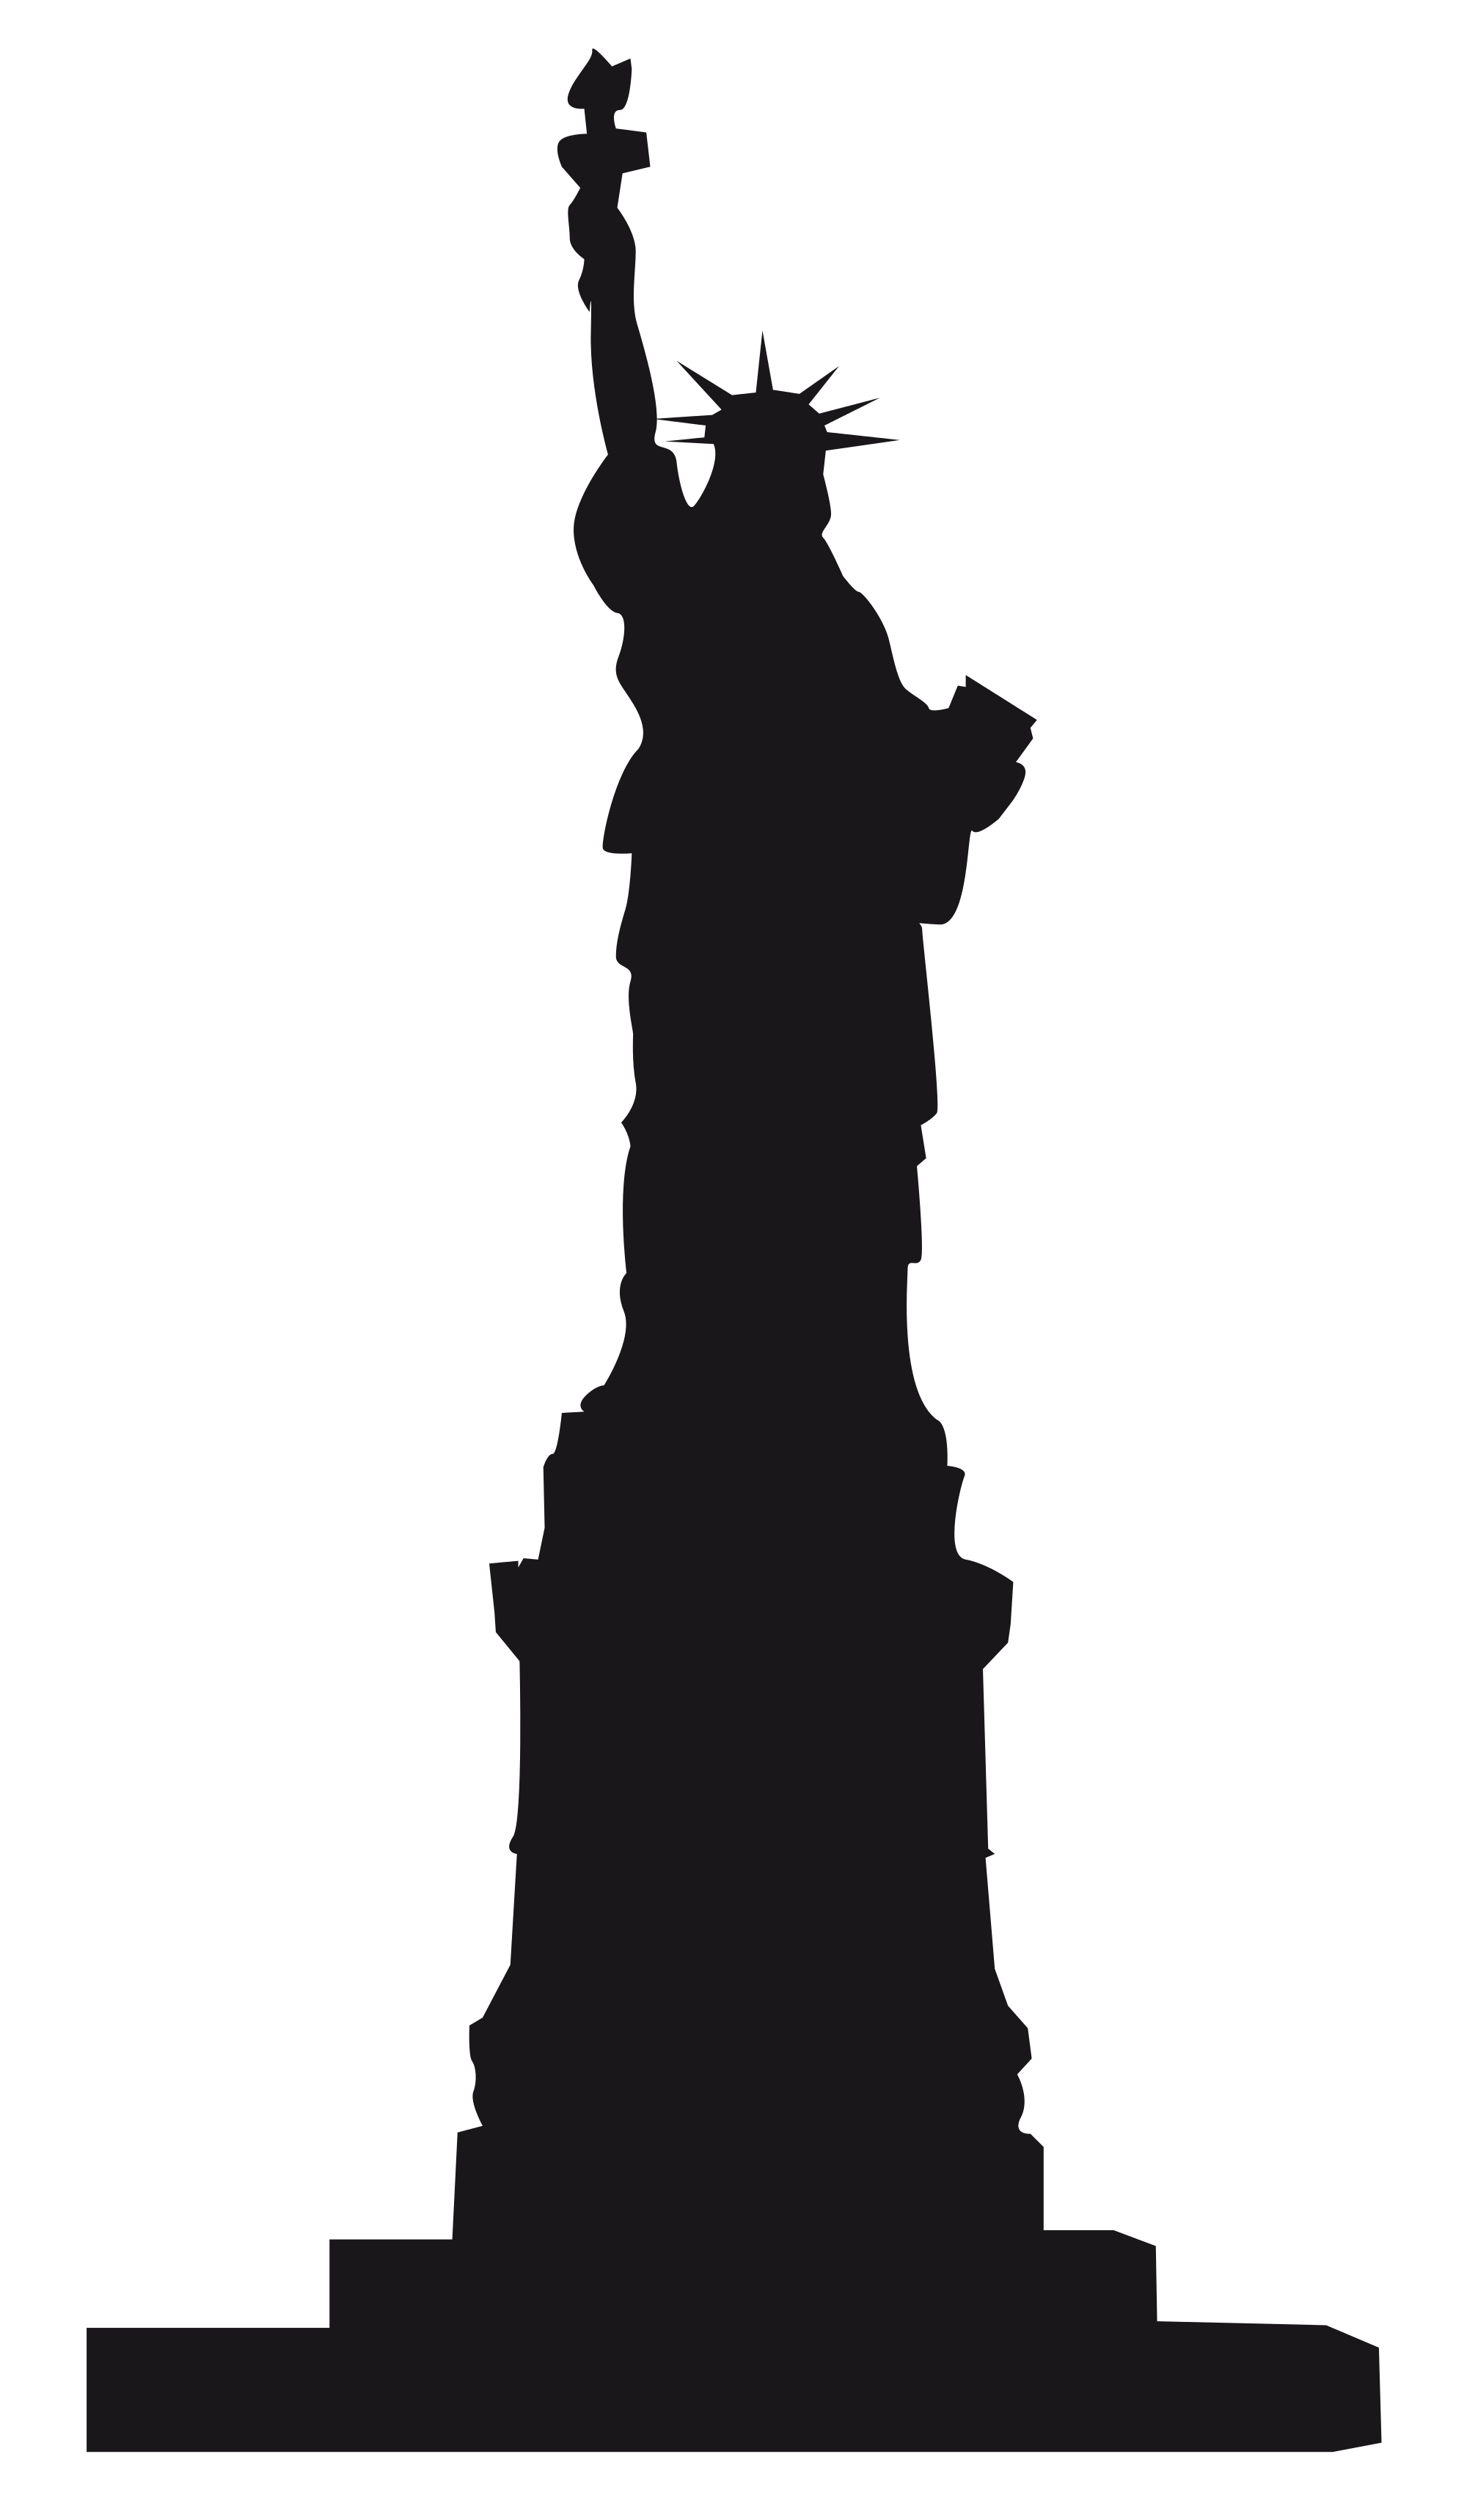 File:Silhouette of the Statue of Liberty in New York.svg ...